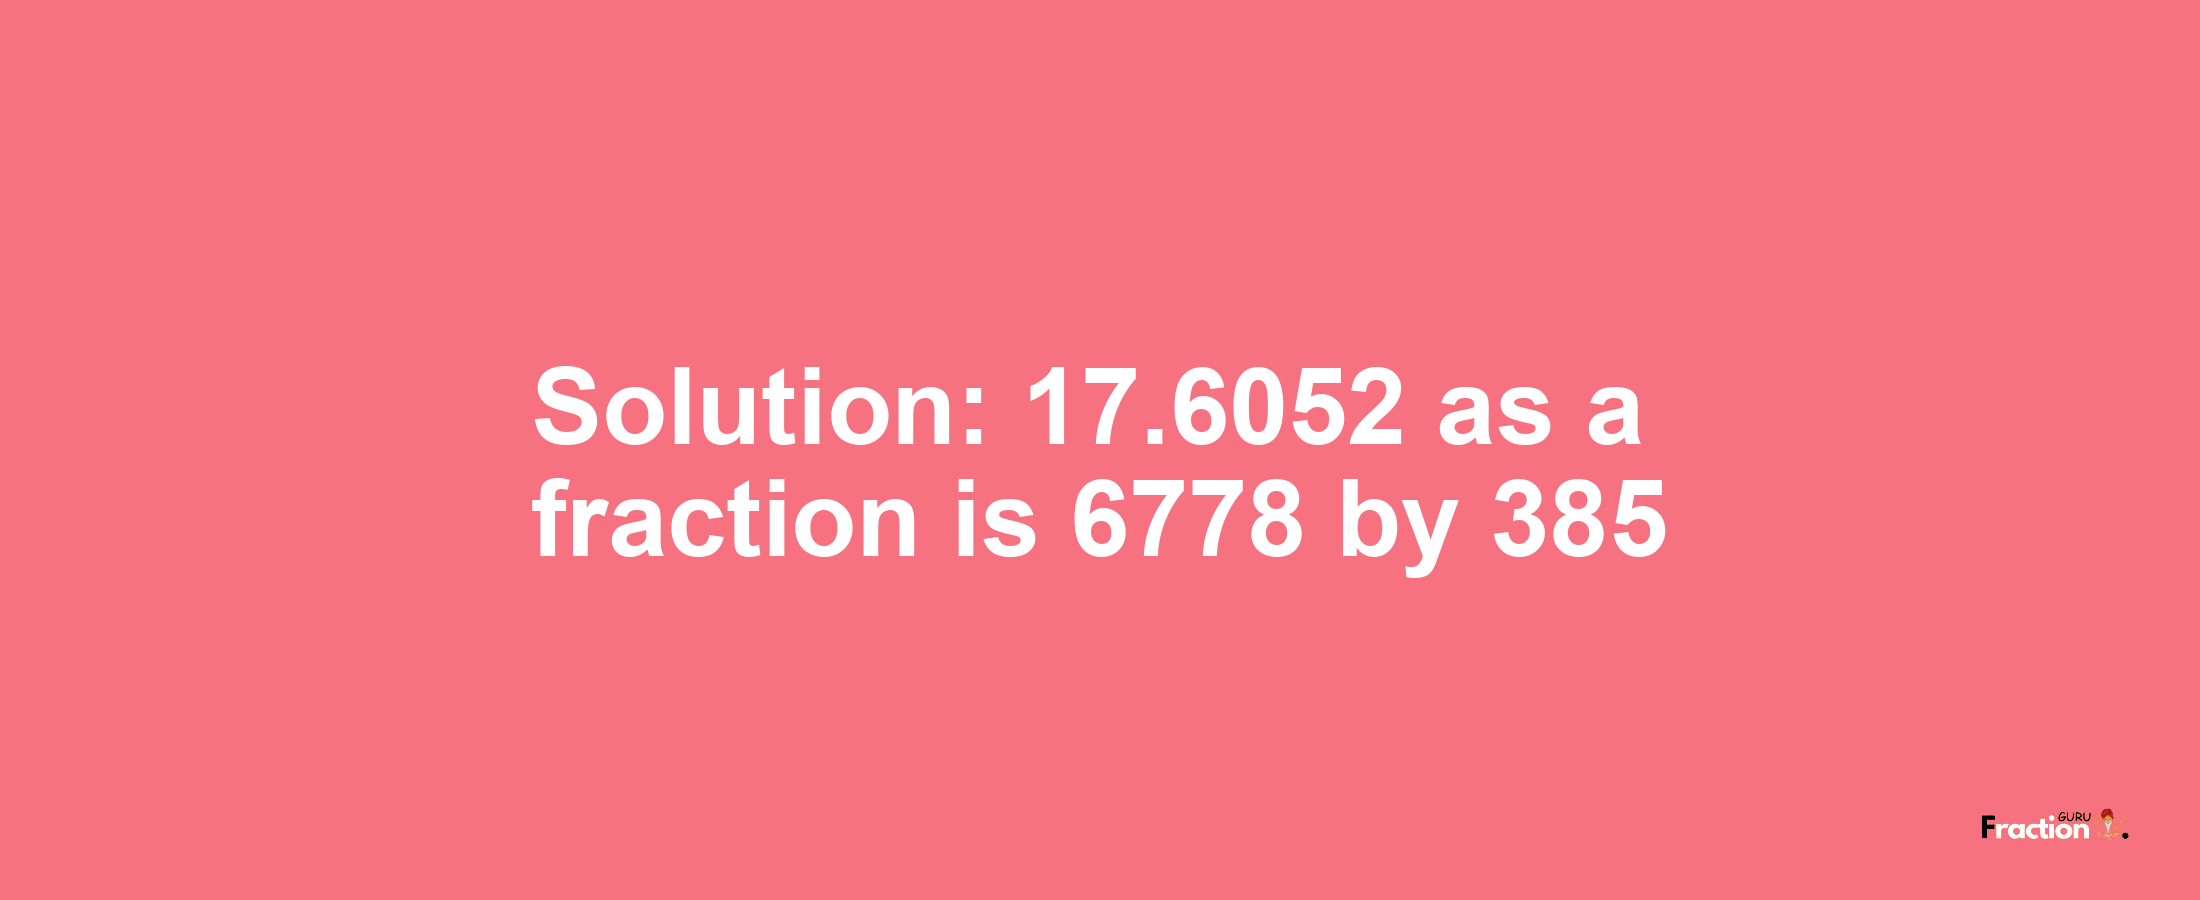 Solution:17.6052 as a fraction is 6778/385